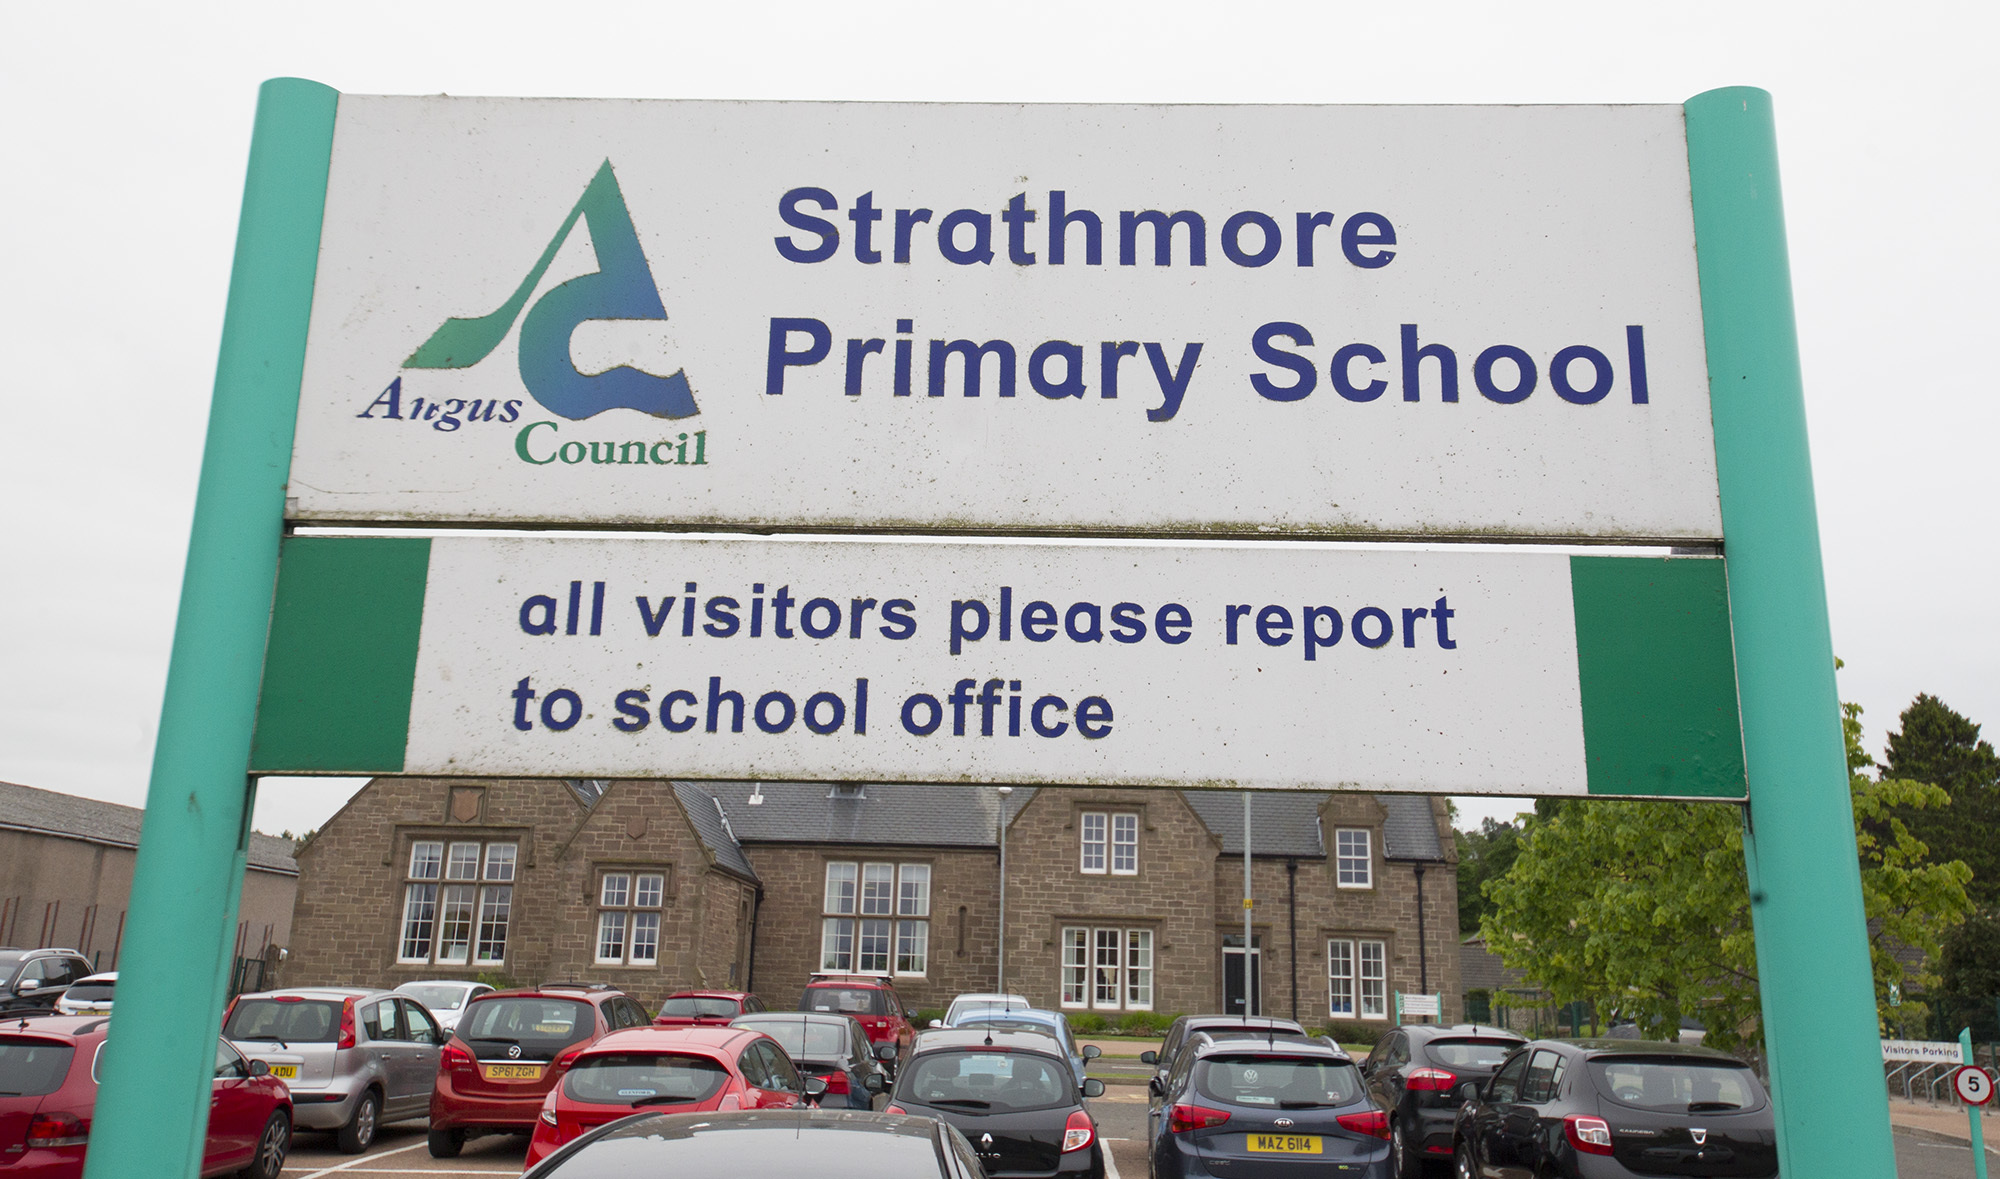 Strathmore Primary School's nursery received a glowing report in 2016 - but demand is high for places across Forfar